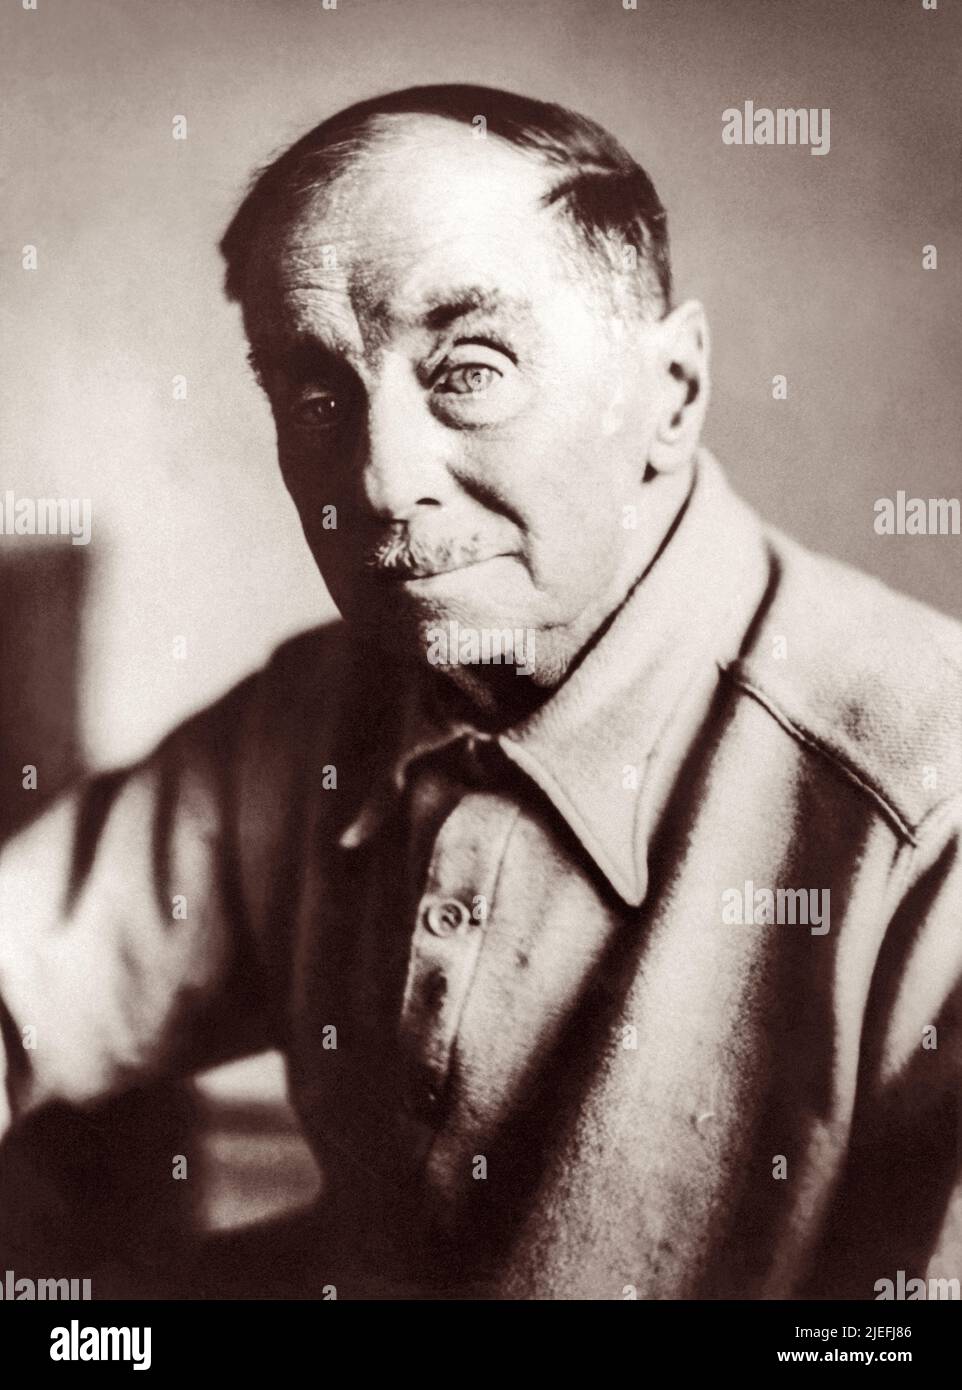 H.G. Wells (1866-1946), British author of science fiction classics The War of the Worlds, The Invisible Man, The Time Machine, and The Island of Dr. Moreau. (Photo: 1944) Stock Photo